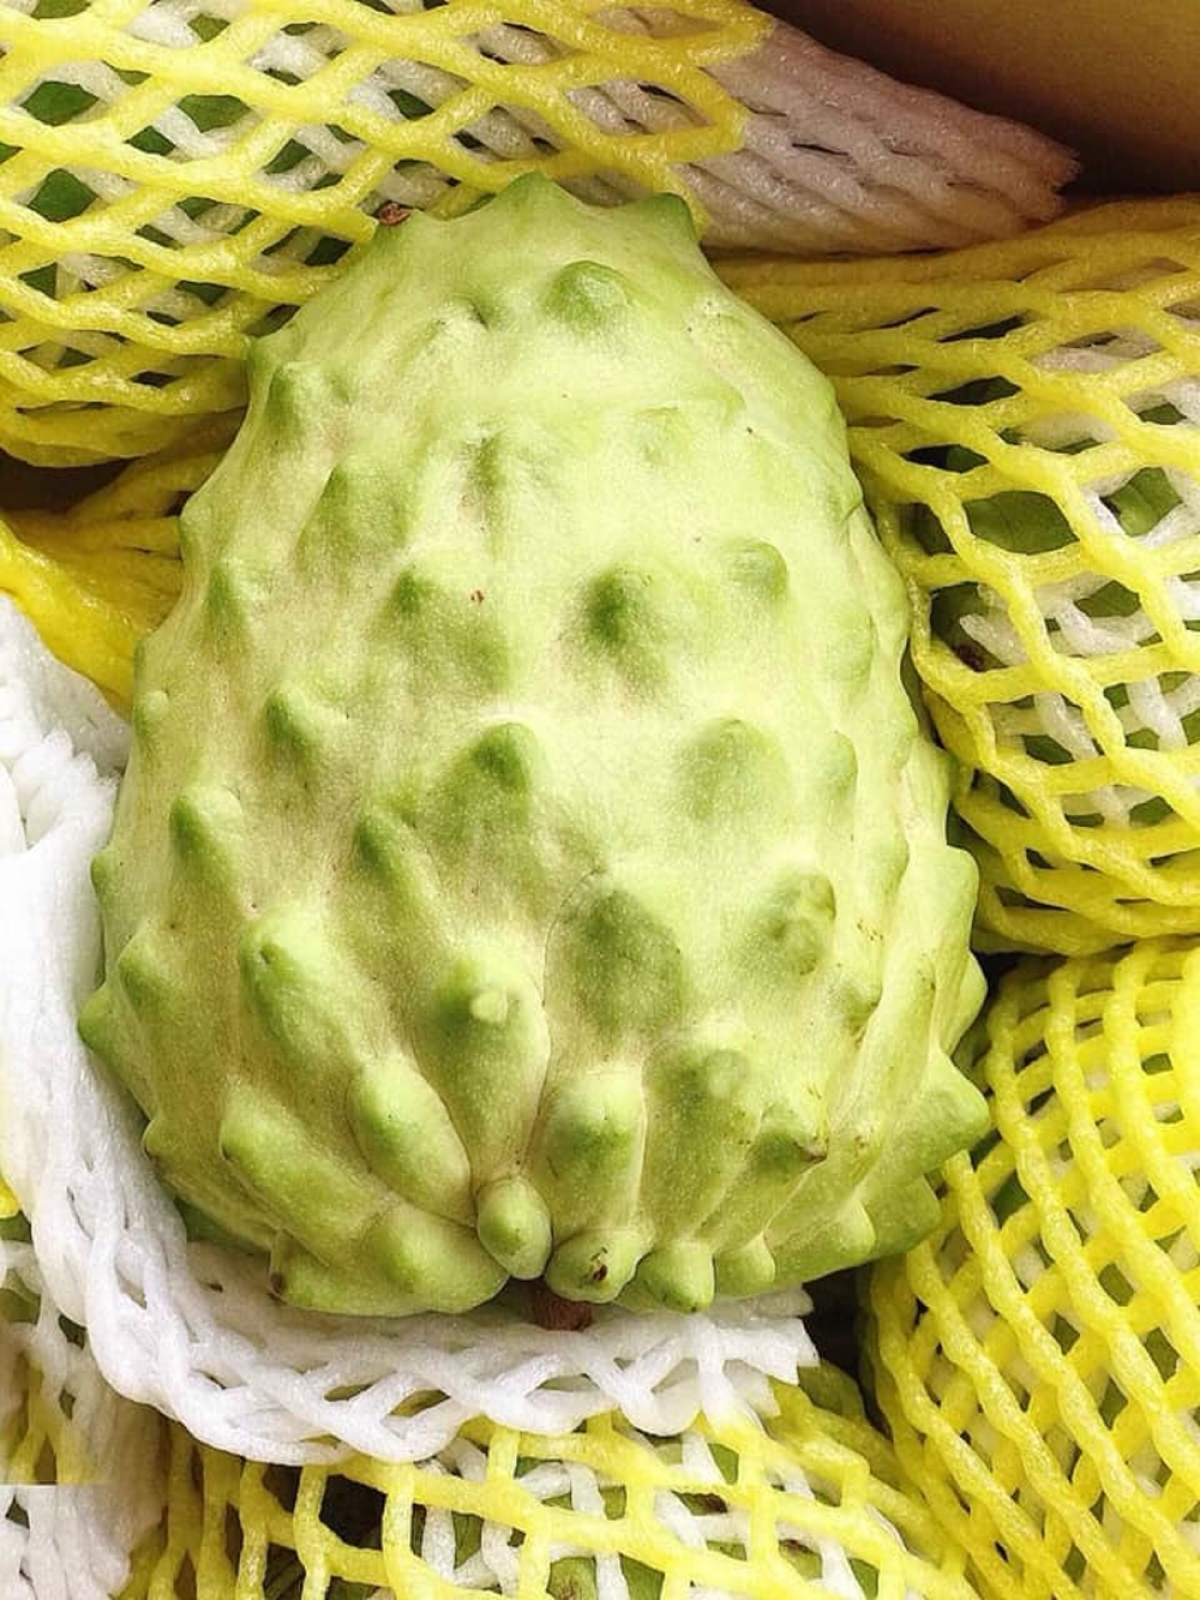 A giant custard apple is valued at up to VND500,000 each. Despite economic difficulties due to the novel coronavirus (COVID-19) epidemic, they still prove popular among local buyers. (Photo: Danviet.vn)